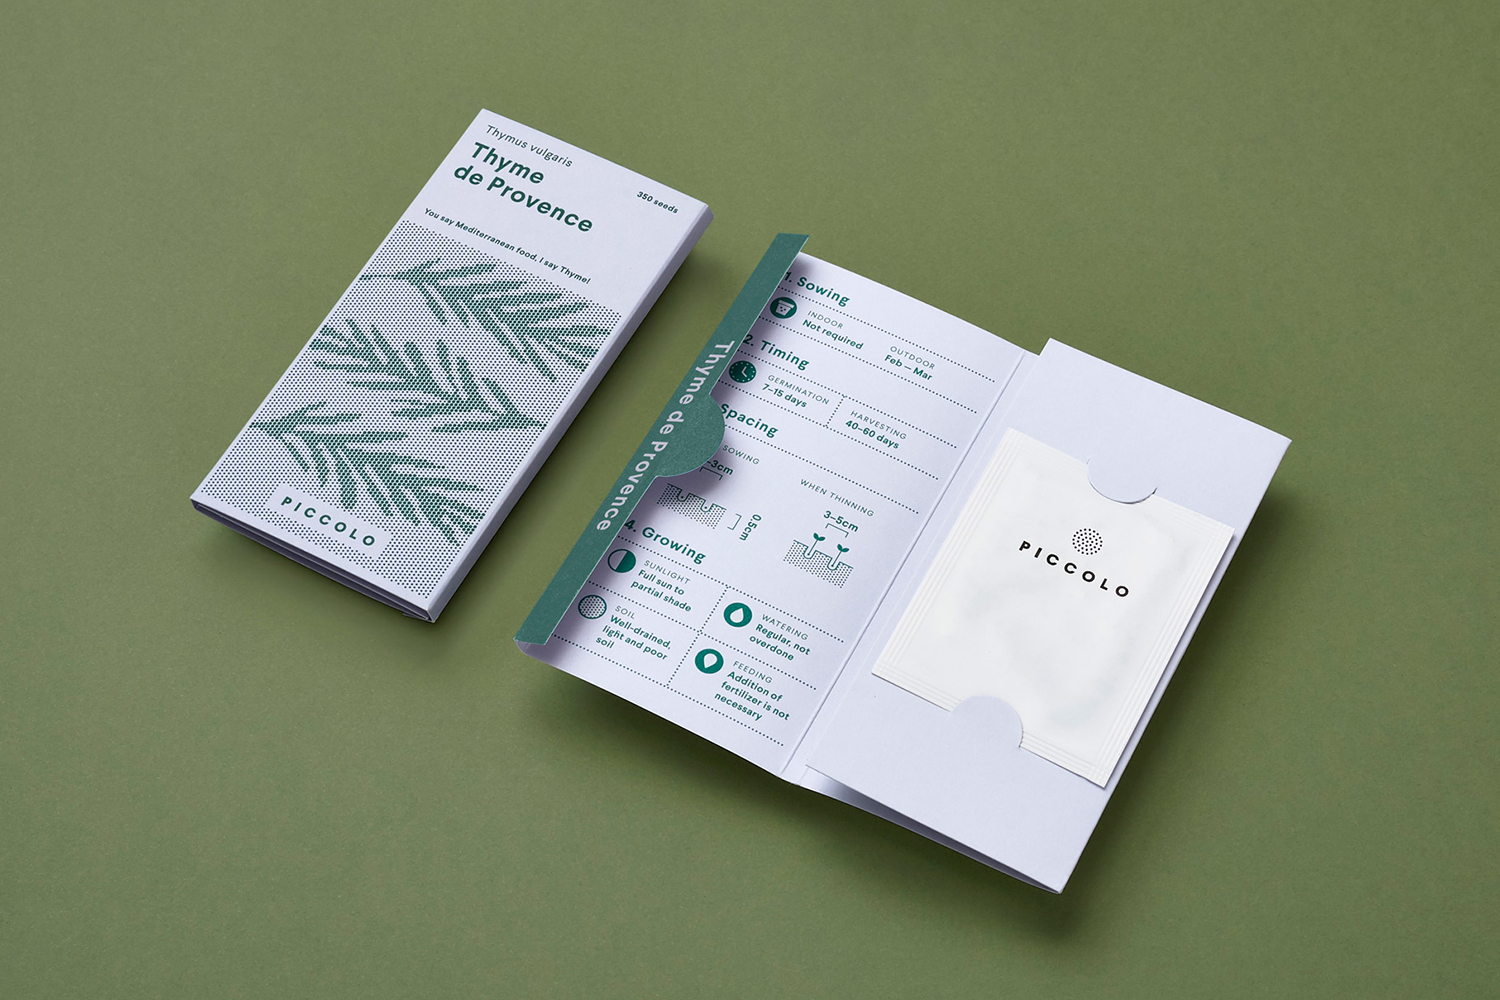 Graphic identity and packaging by Here Design for Italian seed brand Piccolo